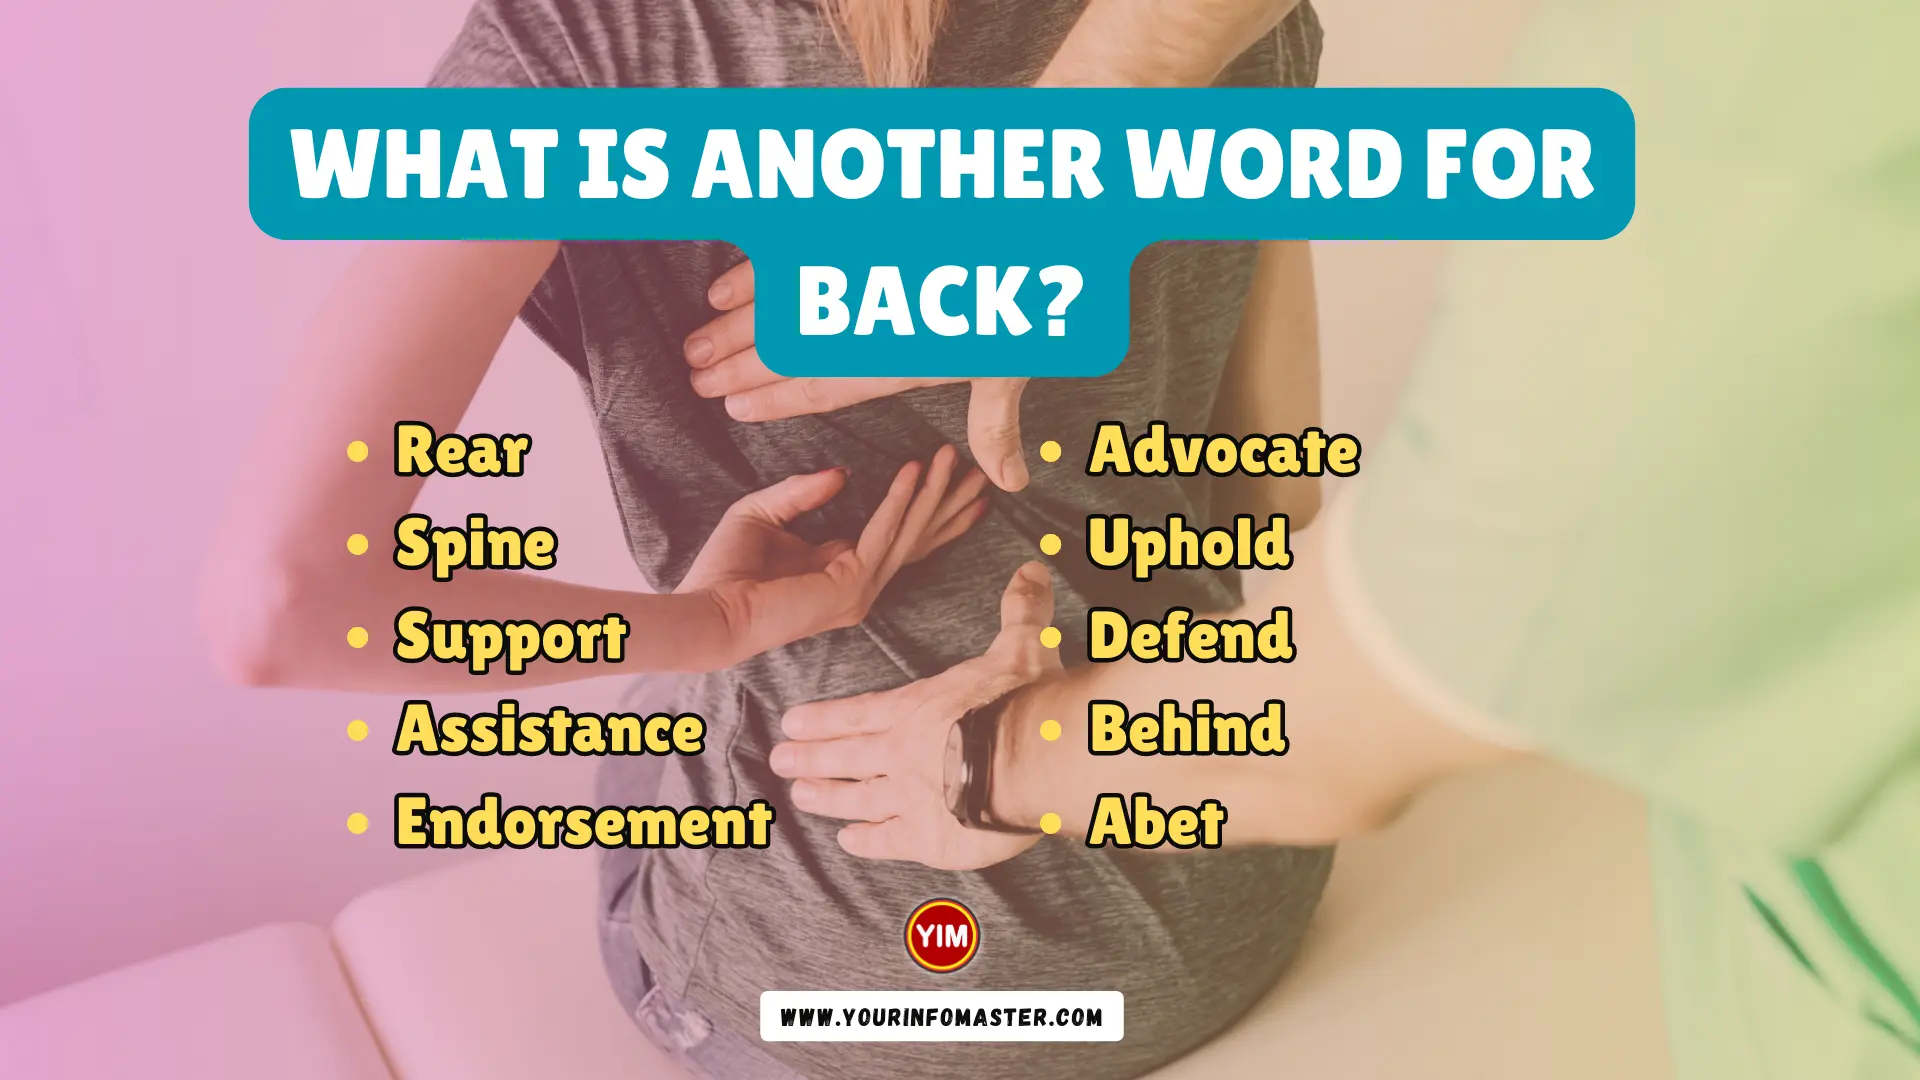 What is another word for Back